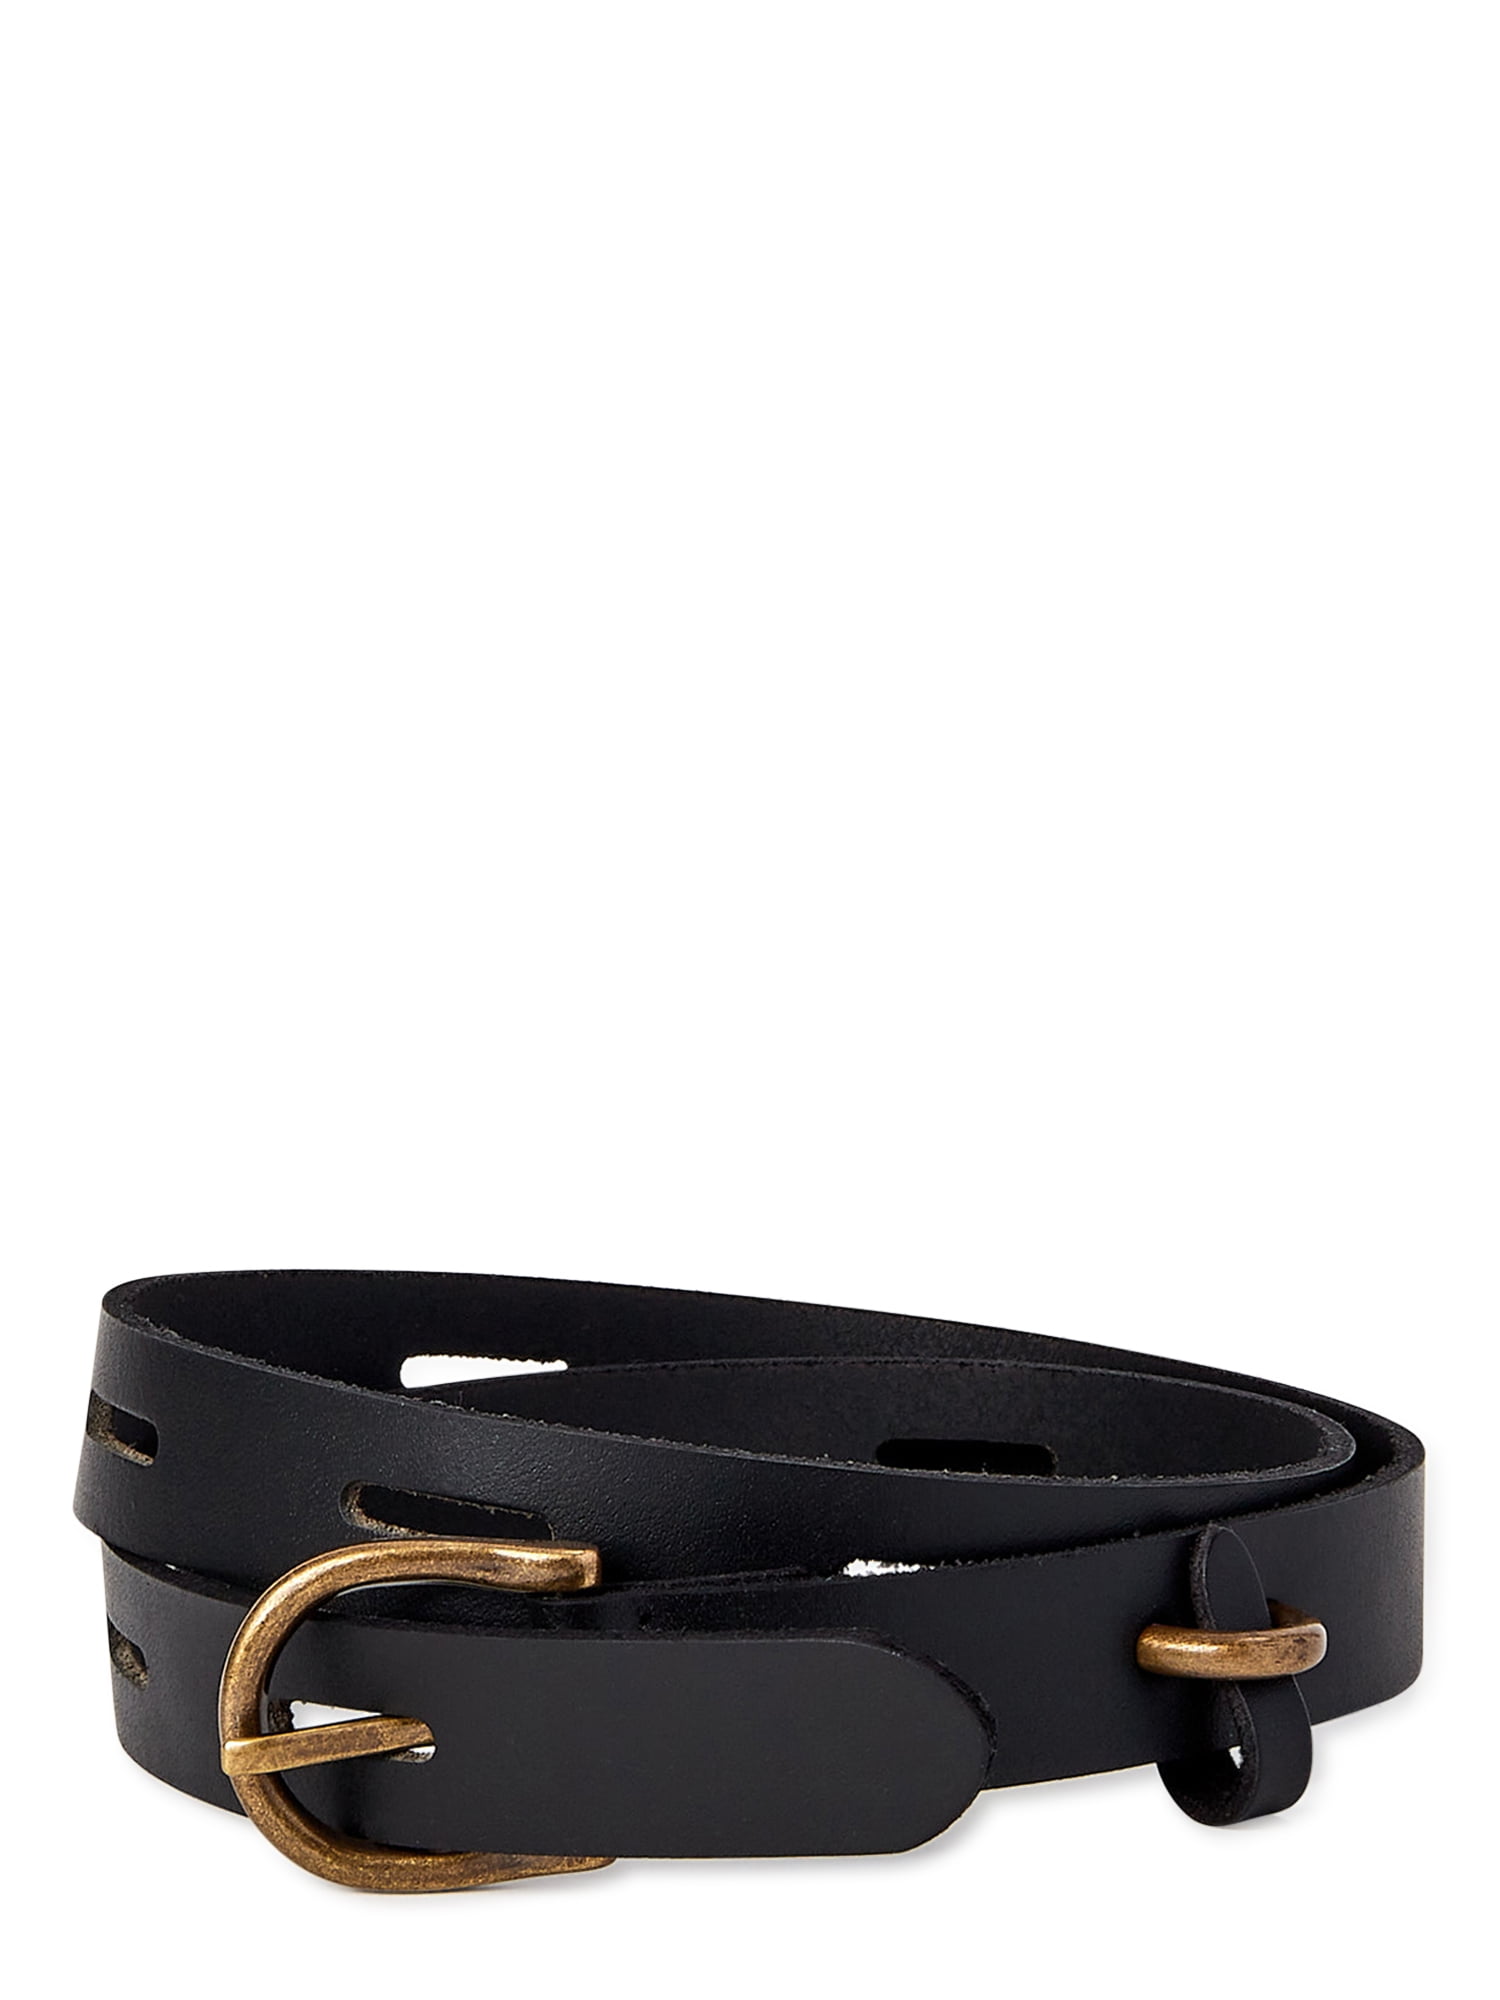 Time and Tru Women's Leather Belt, Black